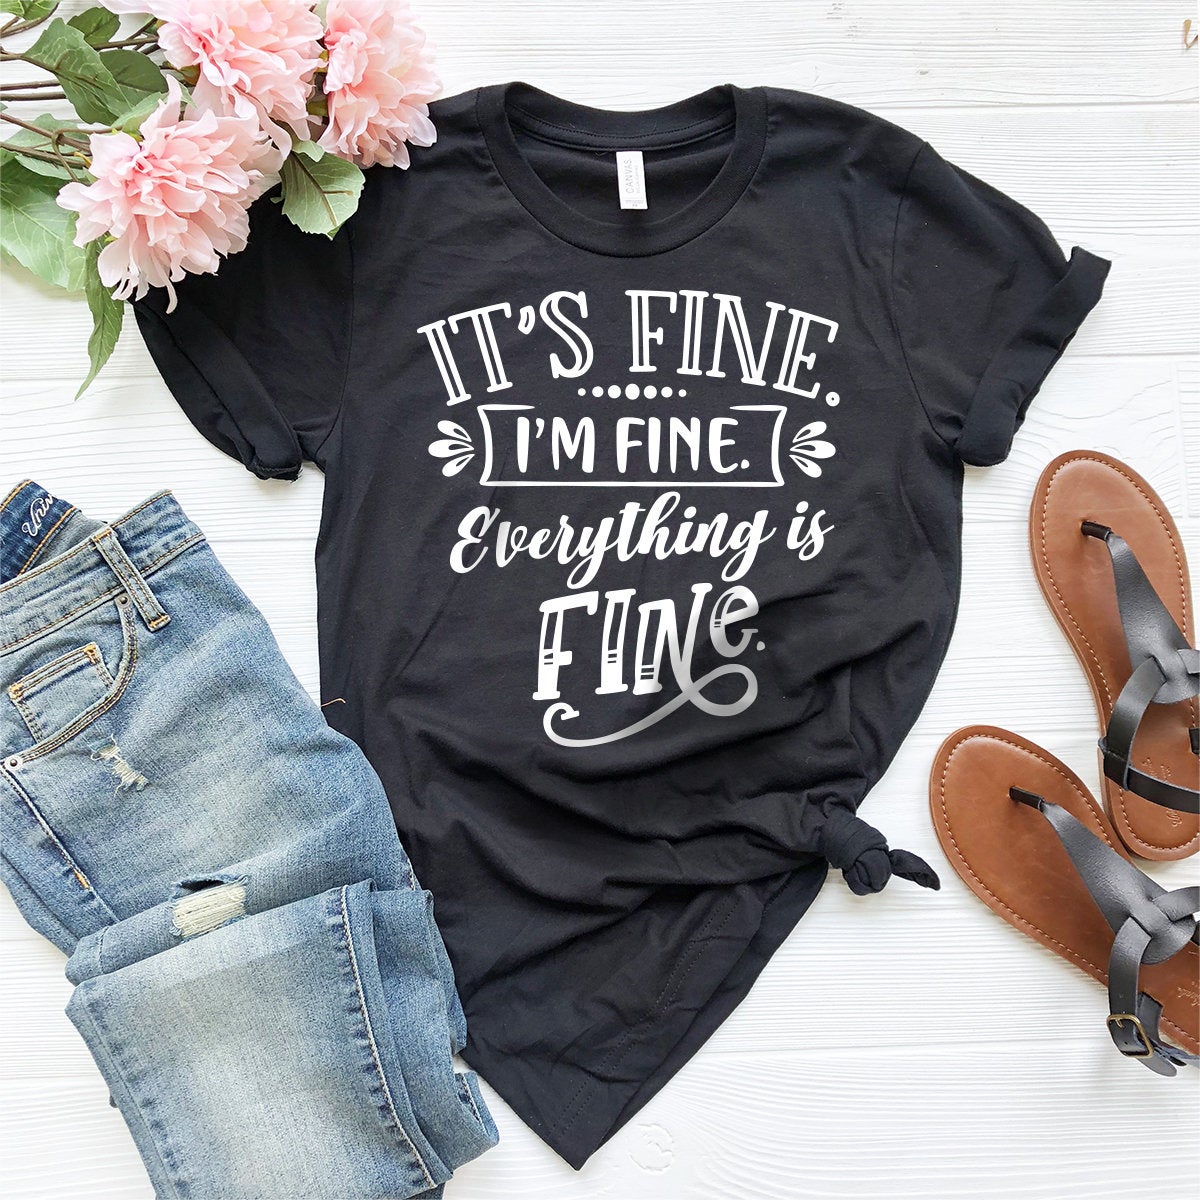 Funny Sarcastic Tee, Sarcastic Quote Shirt, Motivational Tee, Introvert Shirt, Funny T-Shirt, It's Fine I'm Fine Everything Is Fine Shirt - Fastdeliverytees.com